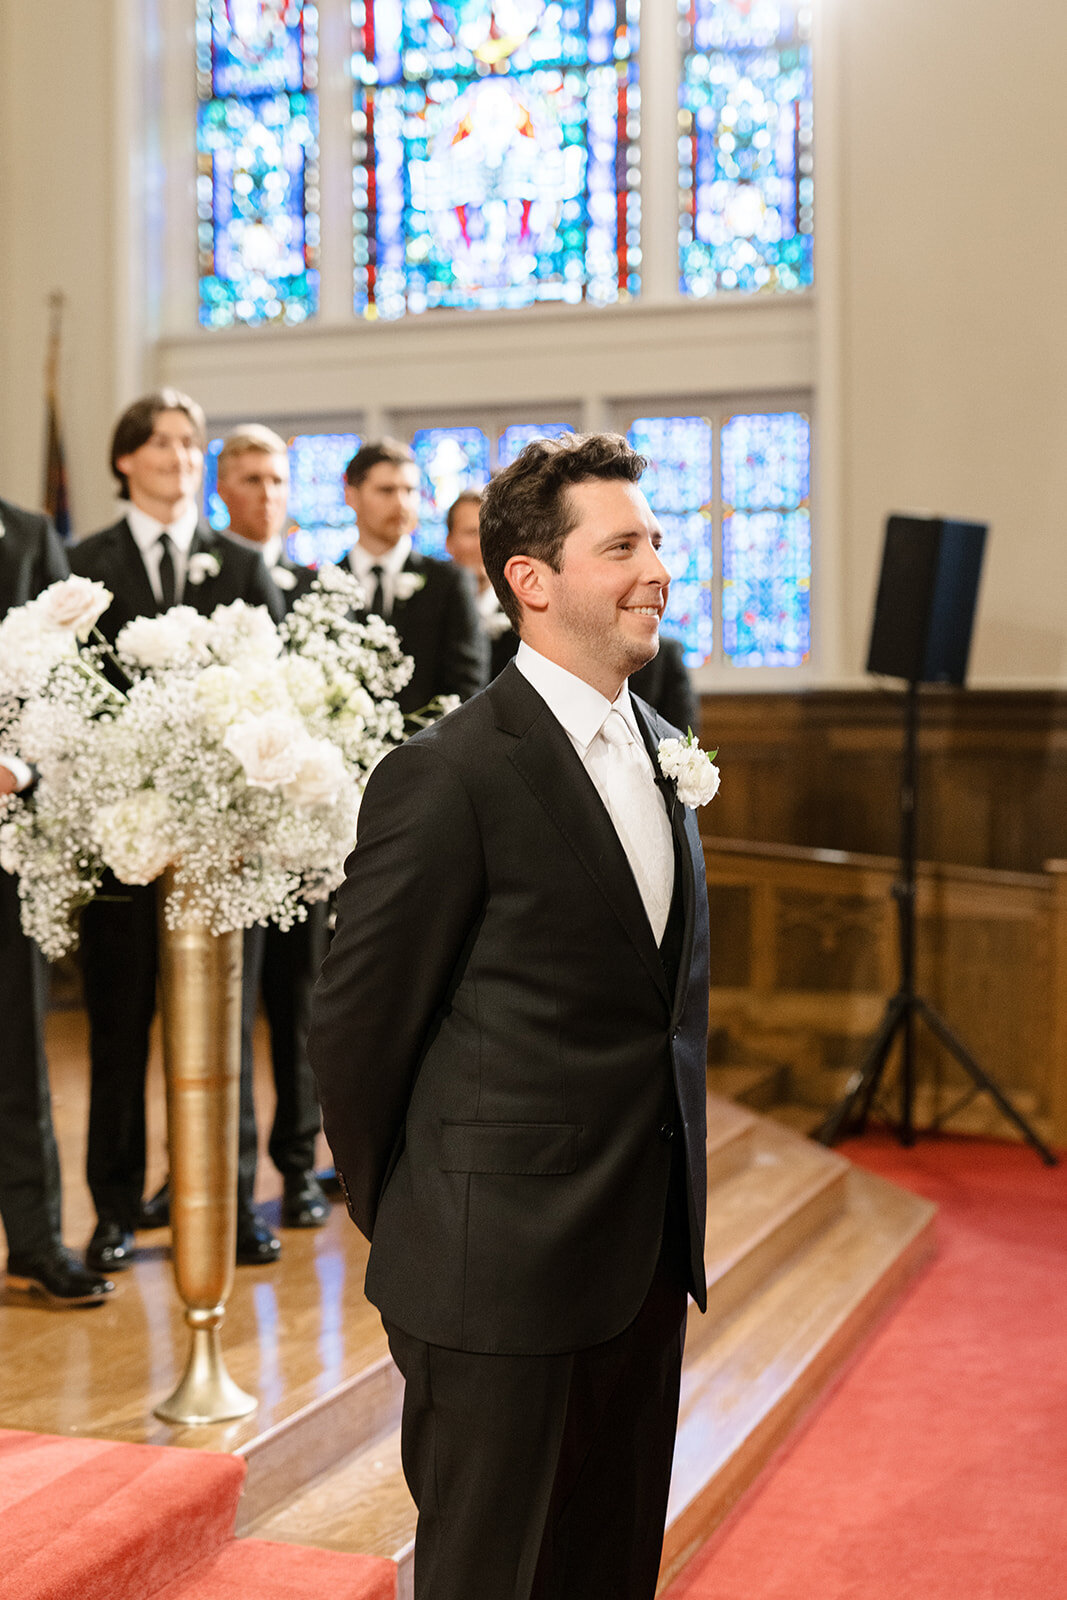 Kylie and Jack at The Grand Hall - Kansas City Wedding Photograpy - Nick and Lexie Photo Film-635